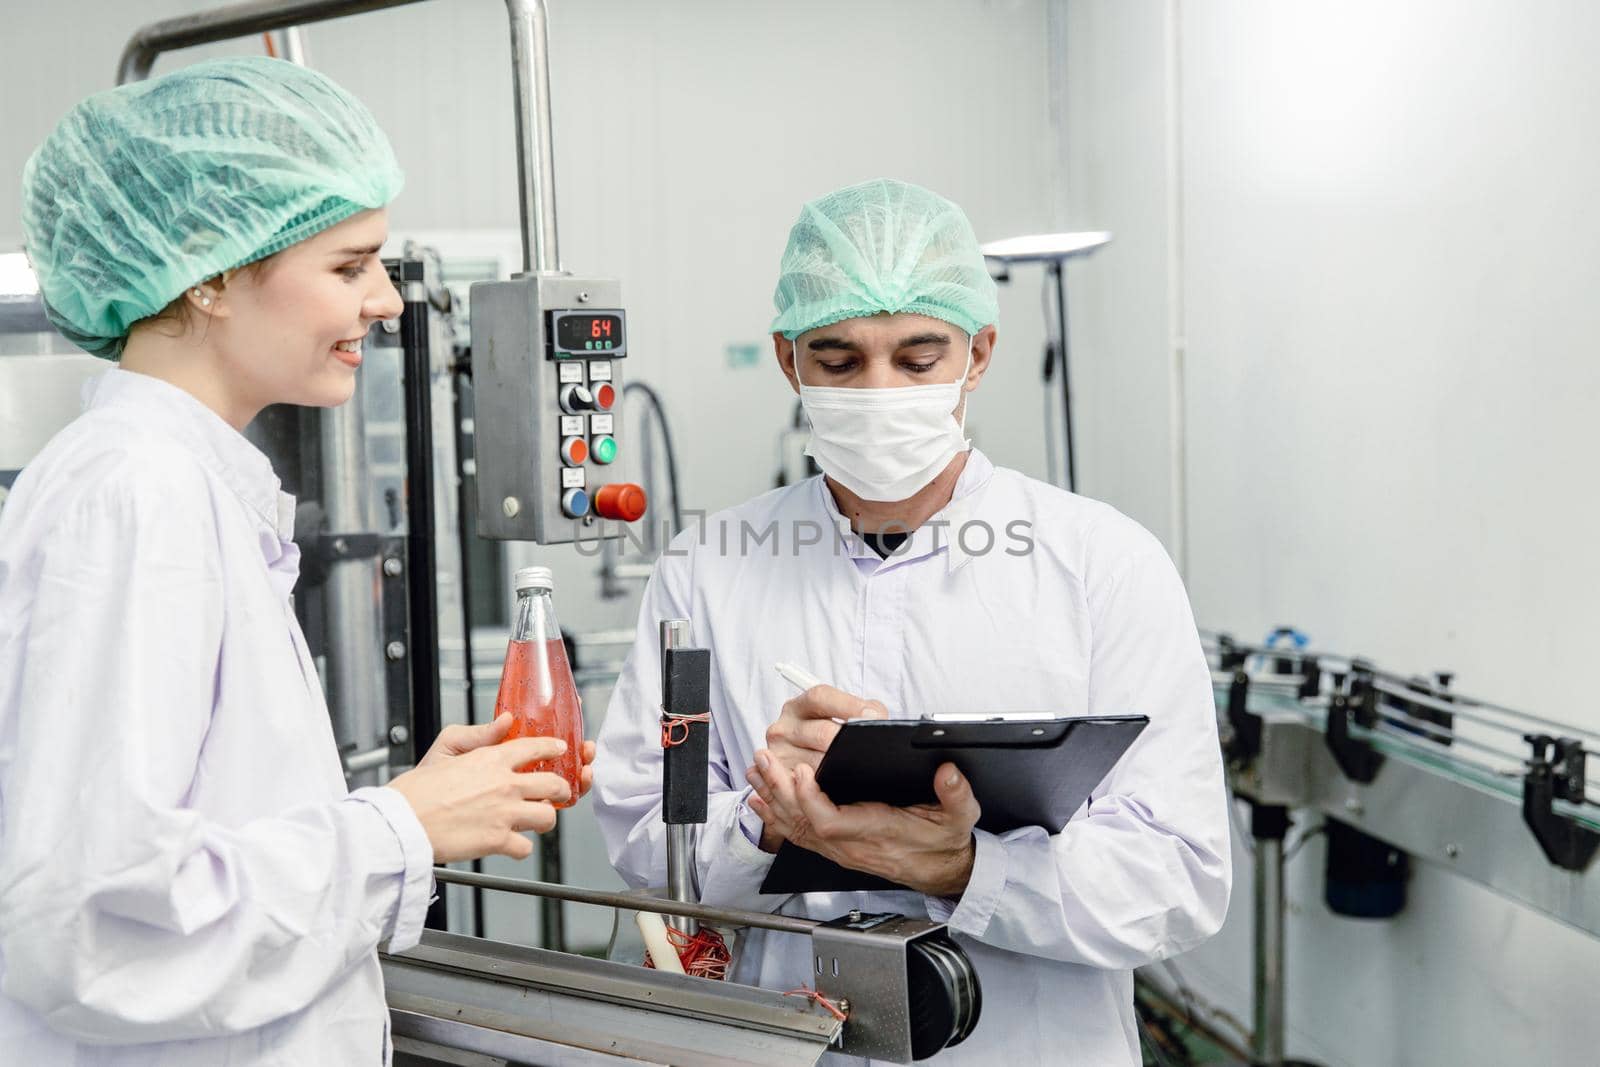 Food and drink factory ISO audit quality control team working, hygiene check and process standard inspection in plant production line. by qualitystocks